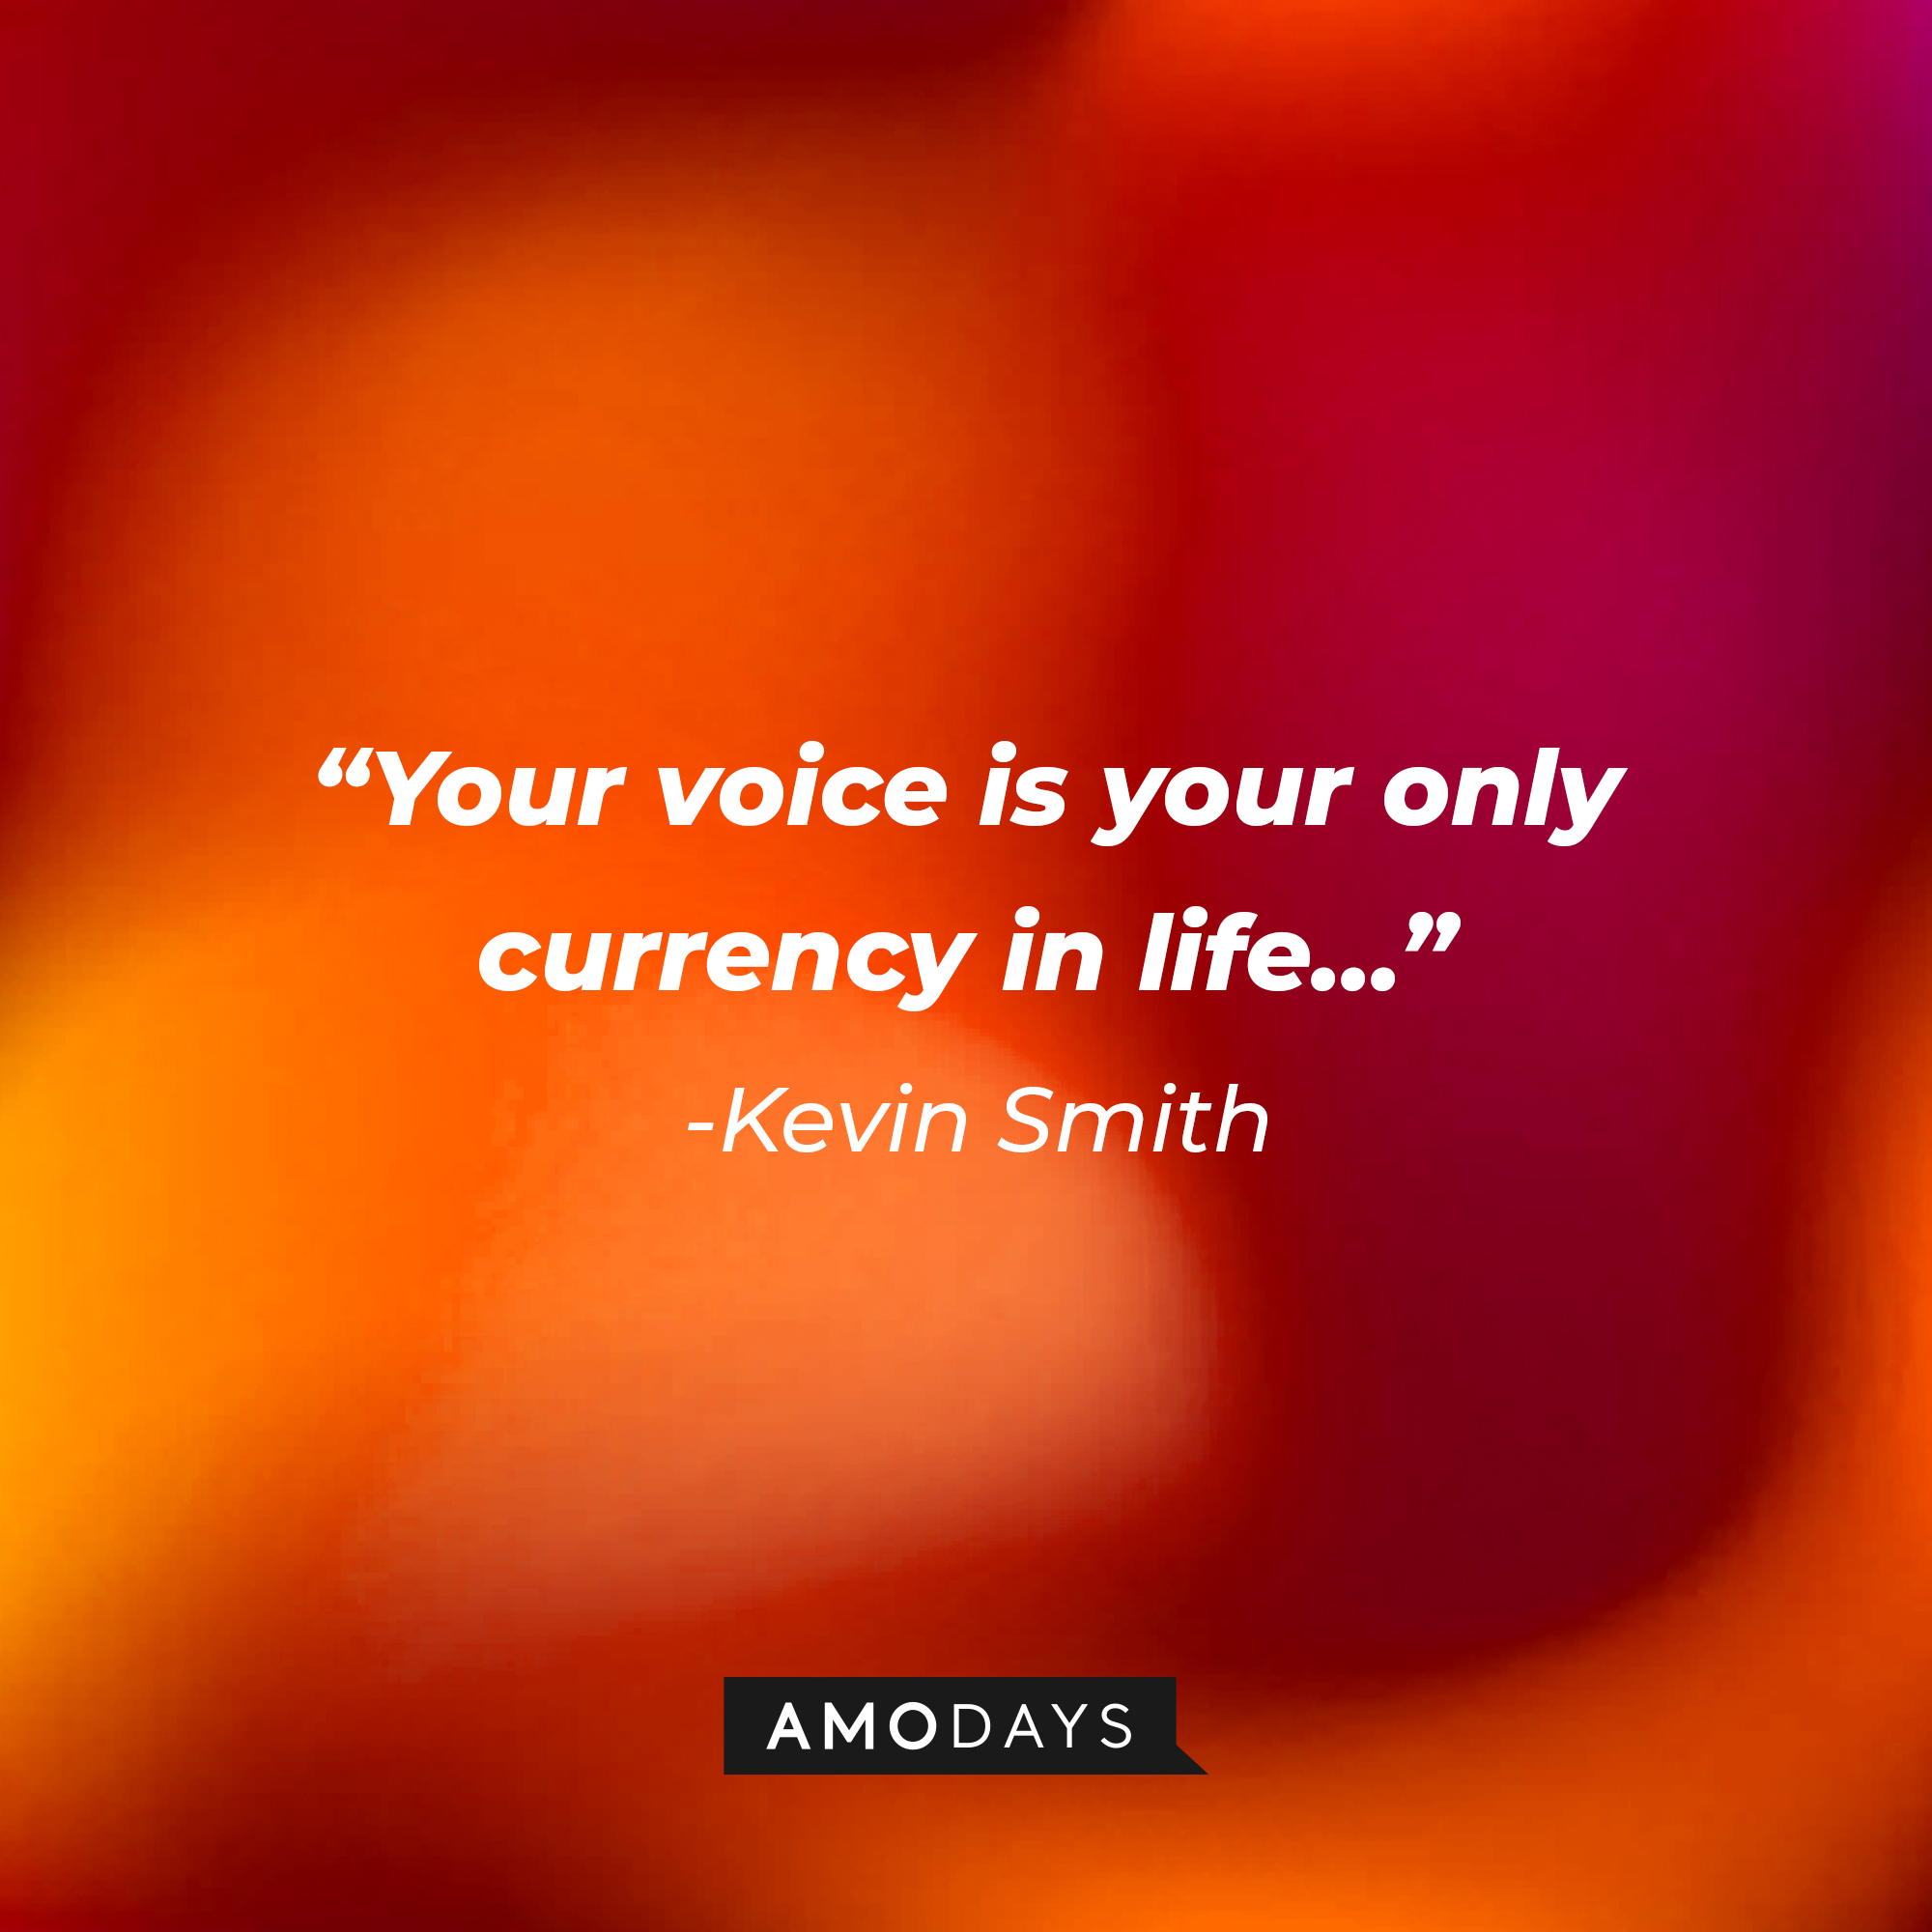 Kevin Smith’s quote:  "Your voice is your only currency in life” | Source: AmoDays